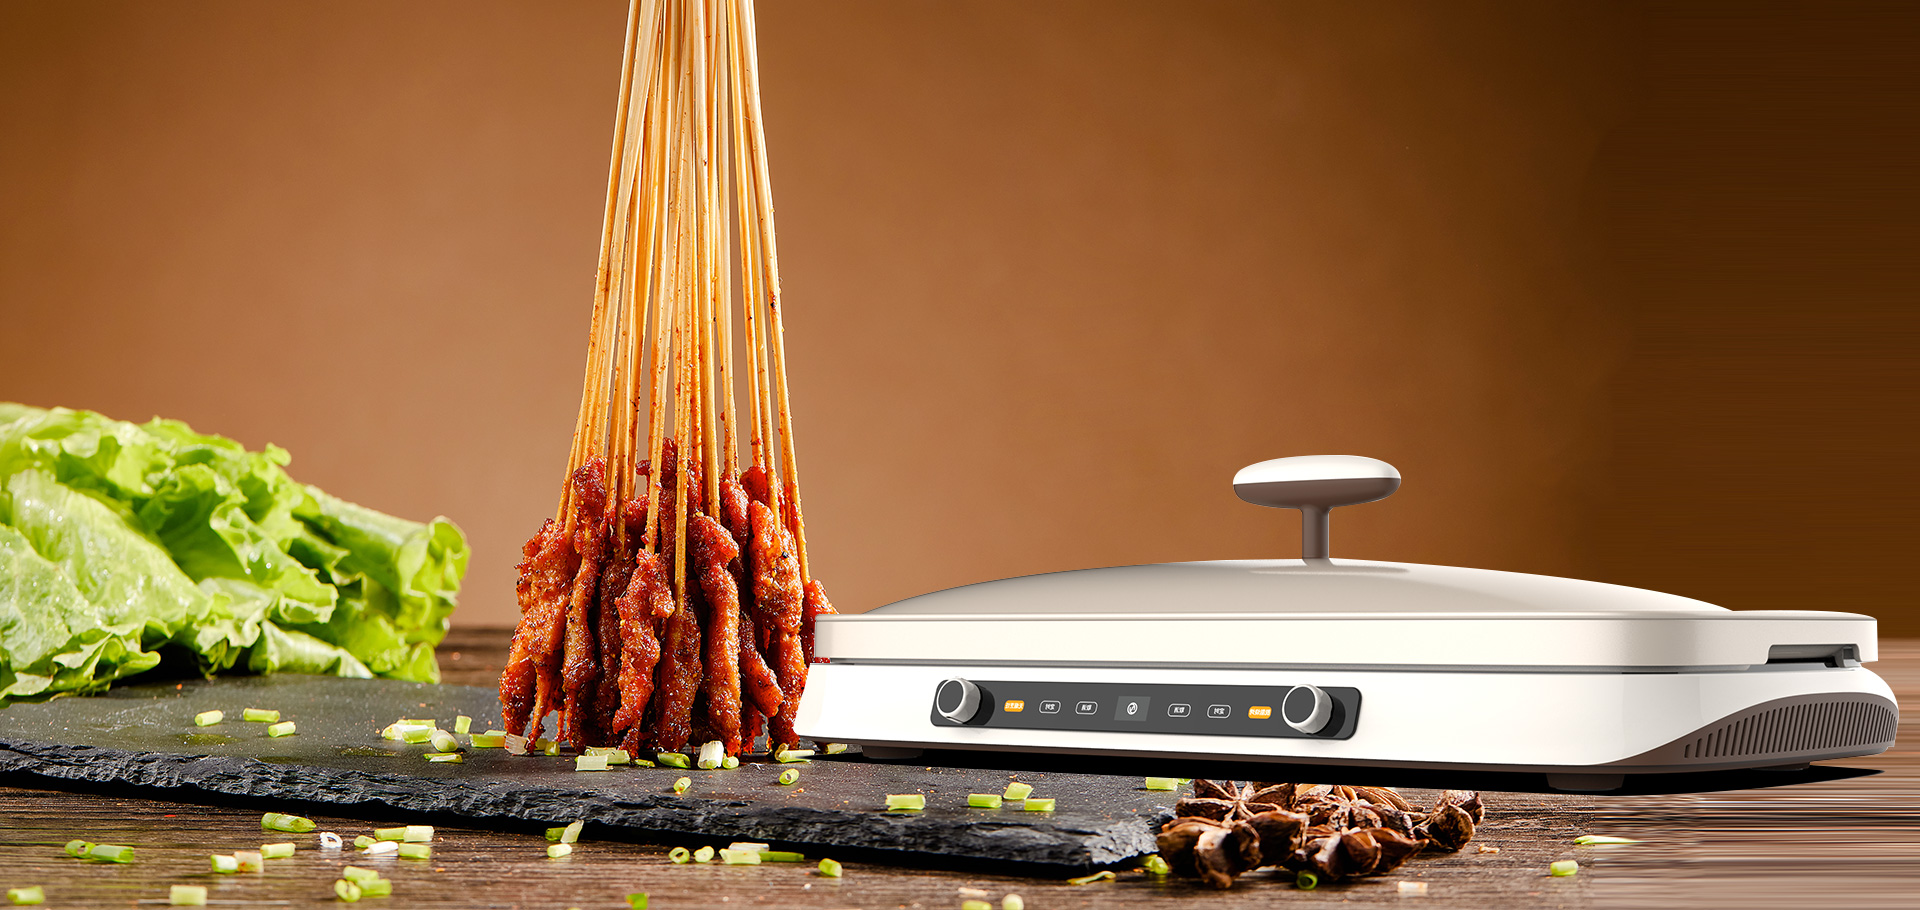 The Sizzle of the Horizontal Smokeless Barbecue Machine